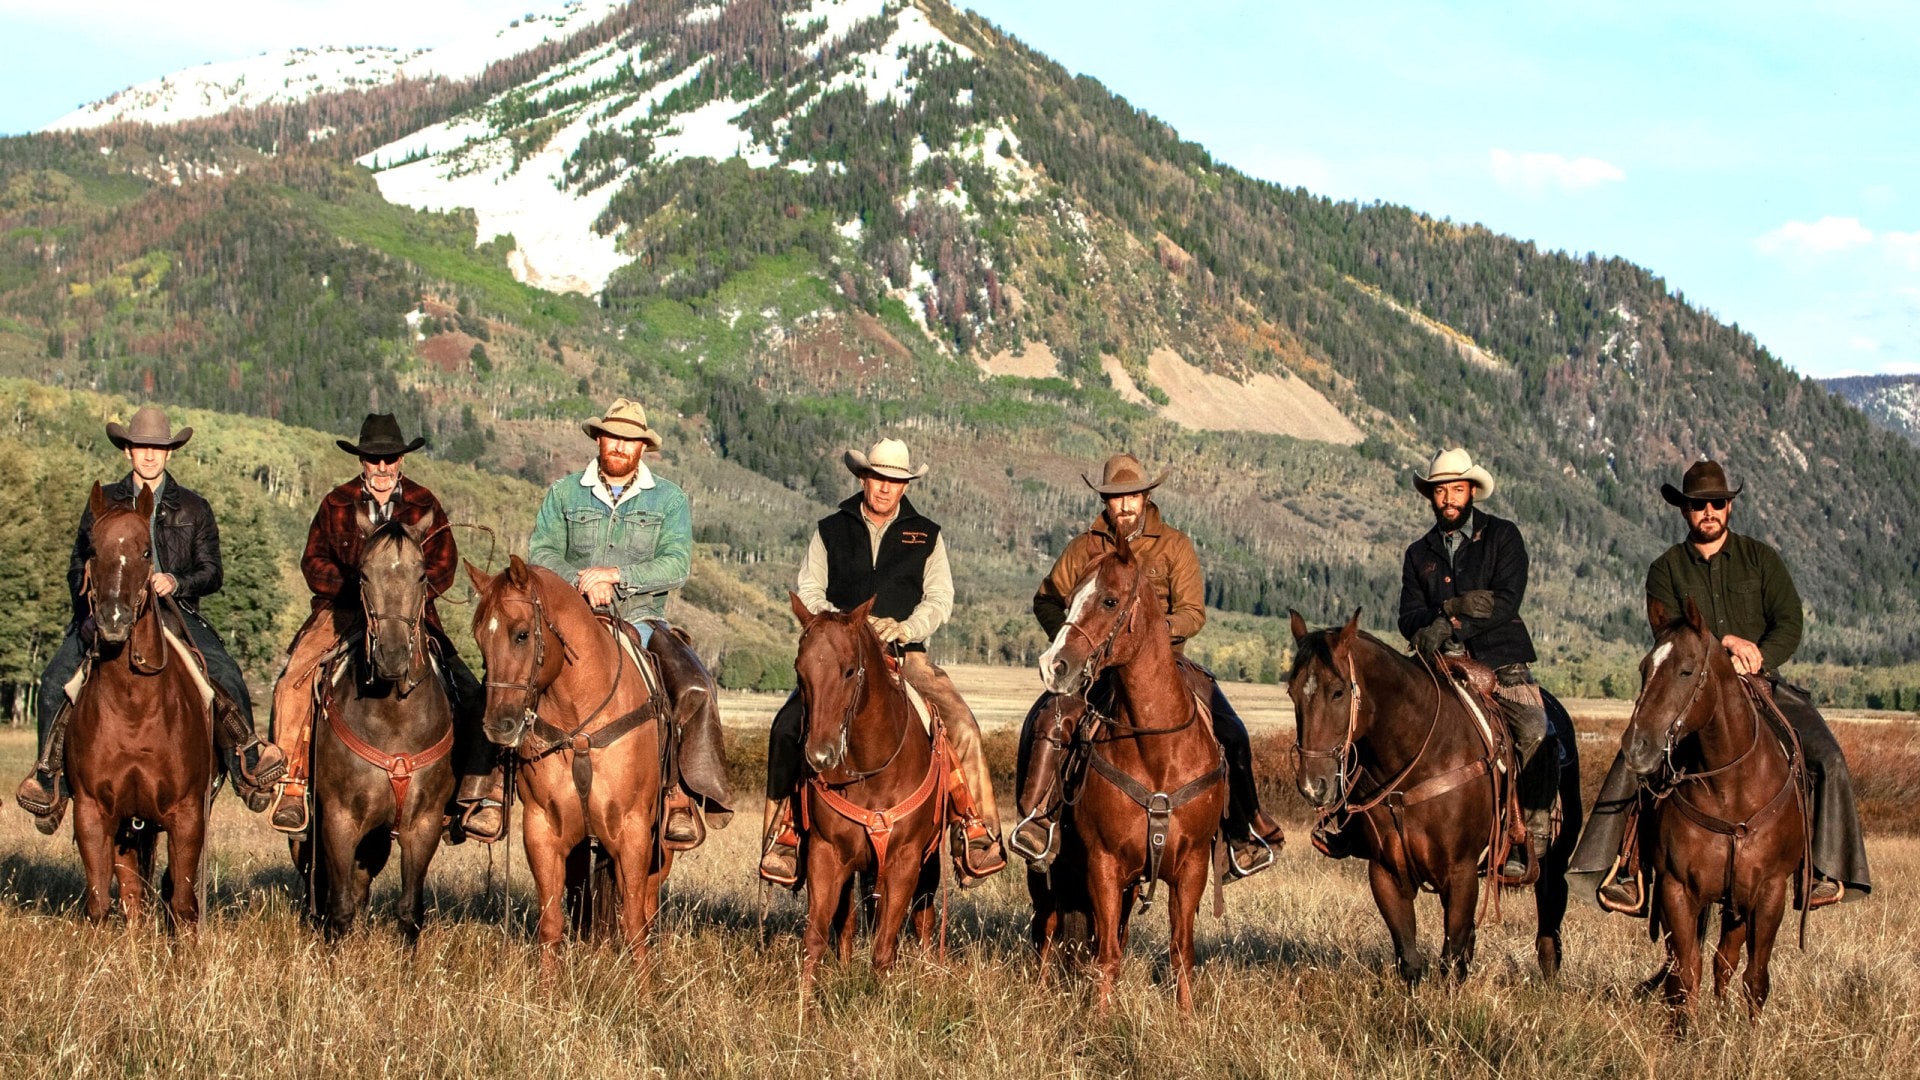 Screen from Yellowstone of men of horses